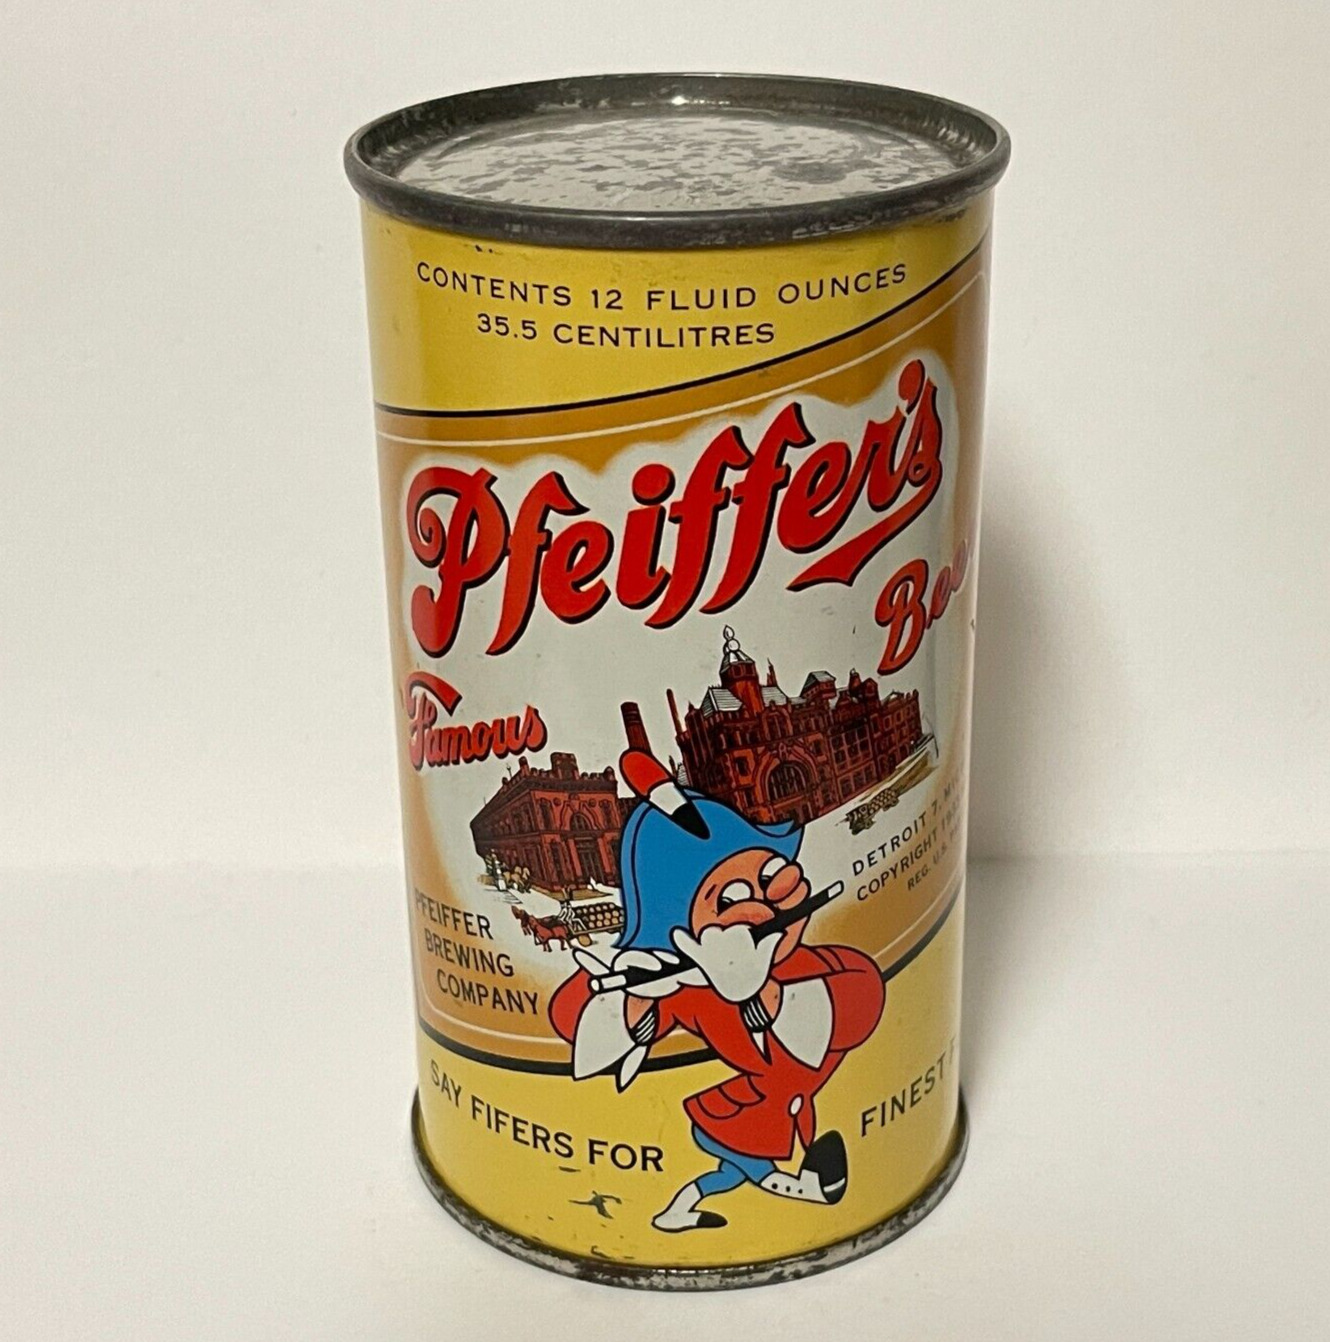 PFEIFFER'S FAMOUS BEER FLAT TOP CAN DETROIT MI Johnny Pfeiffer BLACK SHOES vers